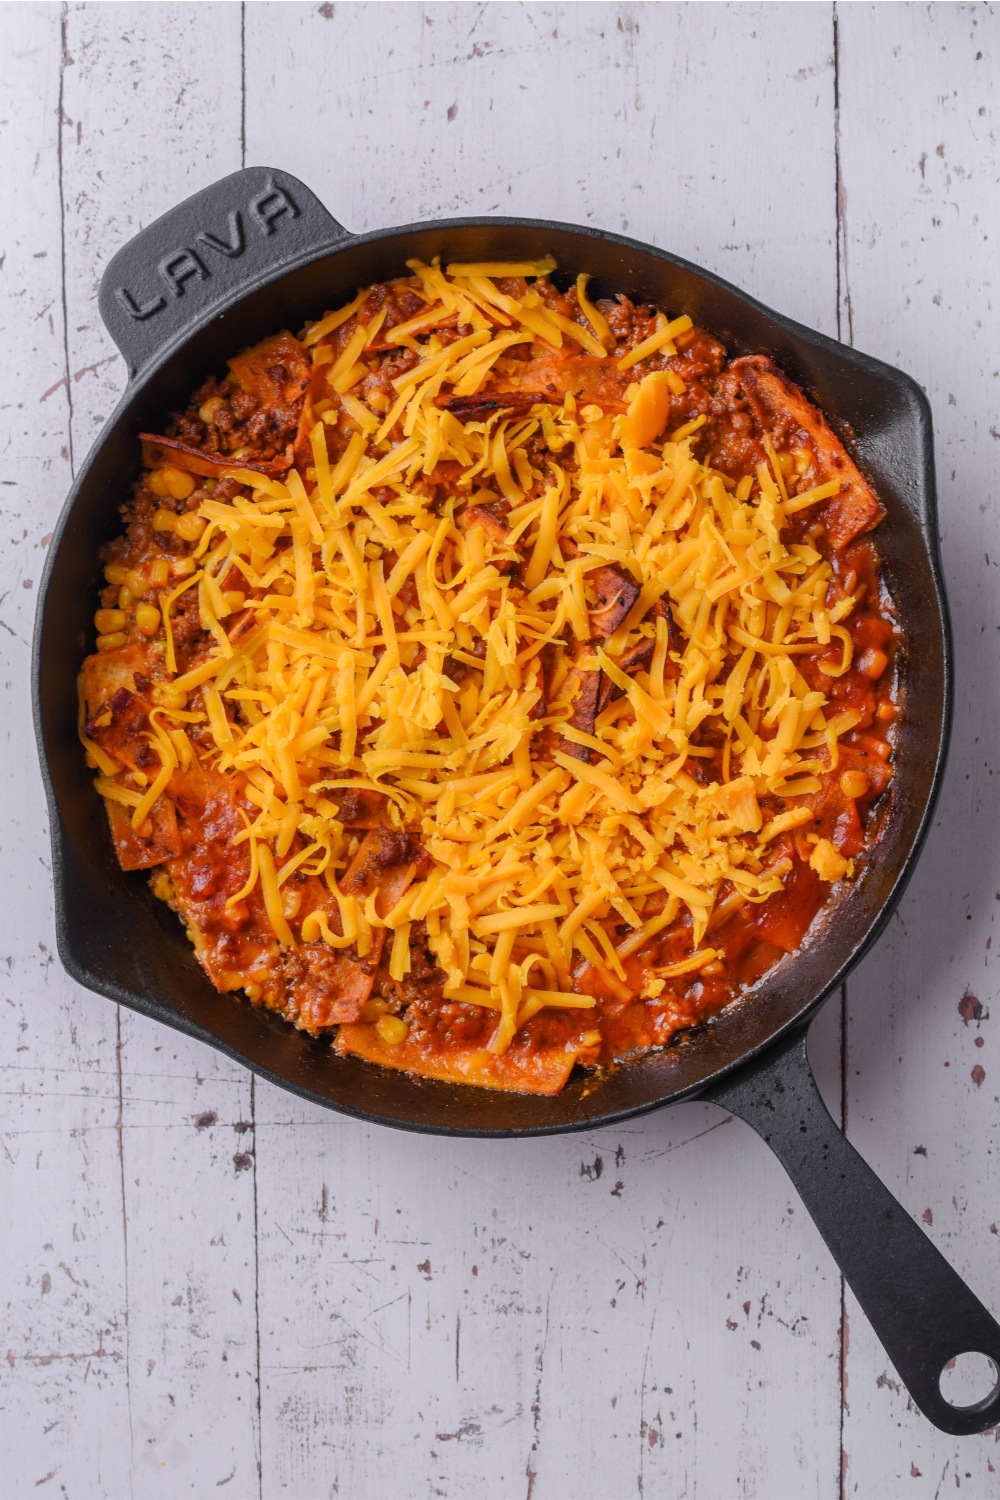 Shredded cheese on top of a frito taco casserole in a skillet.